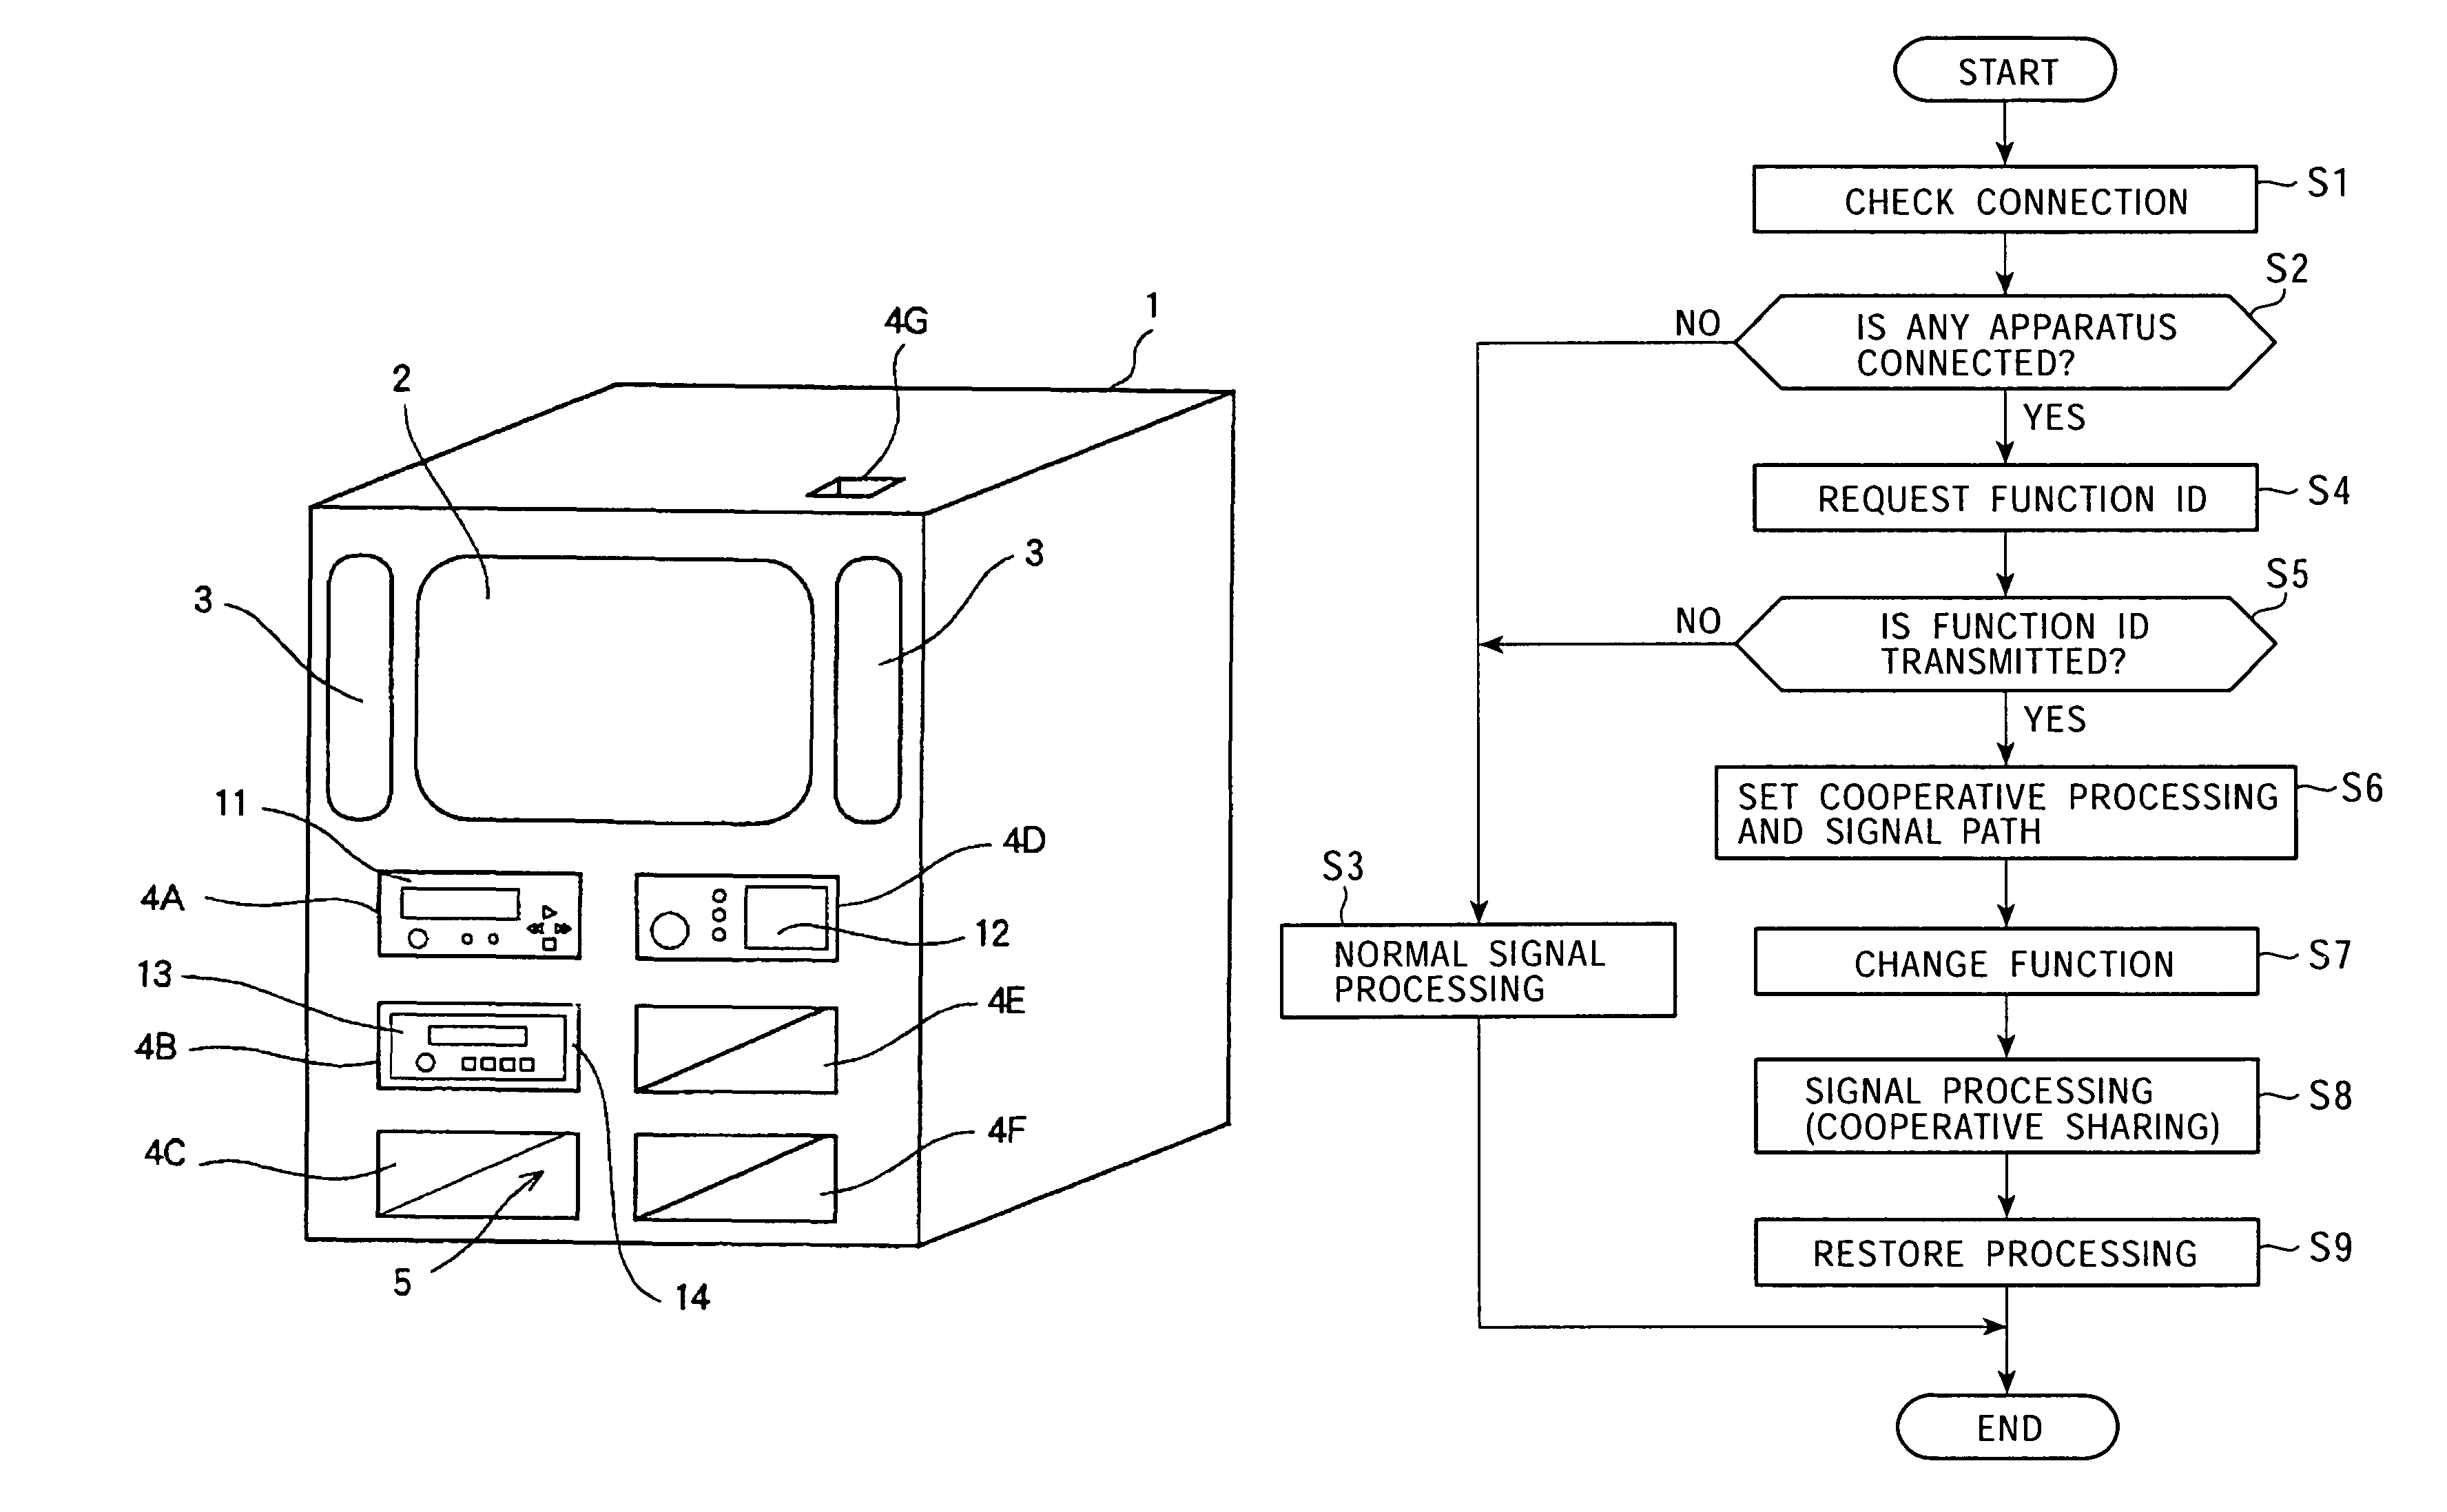 Signal processing device, housing rack, and connector